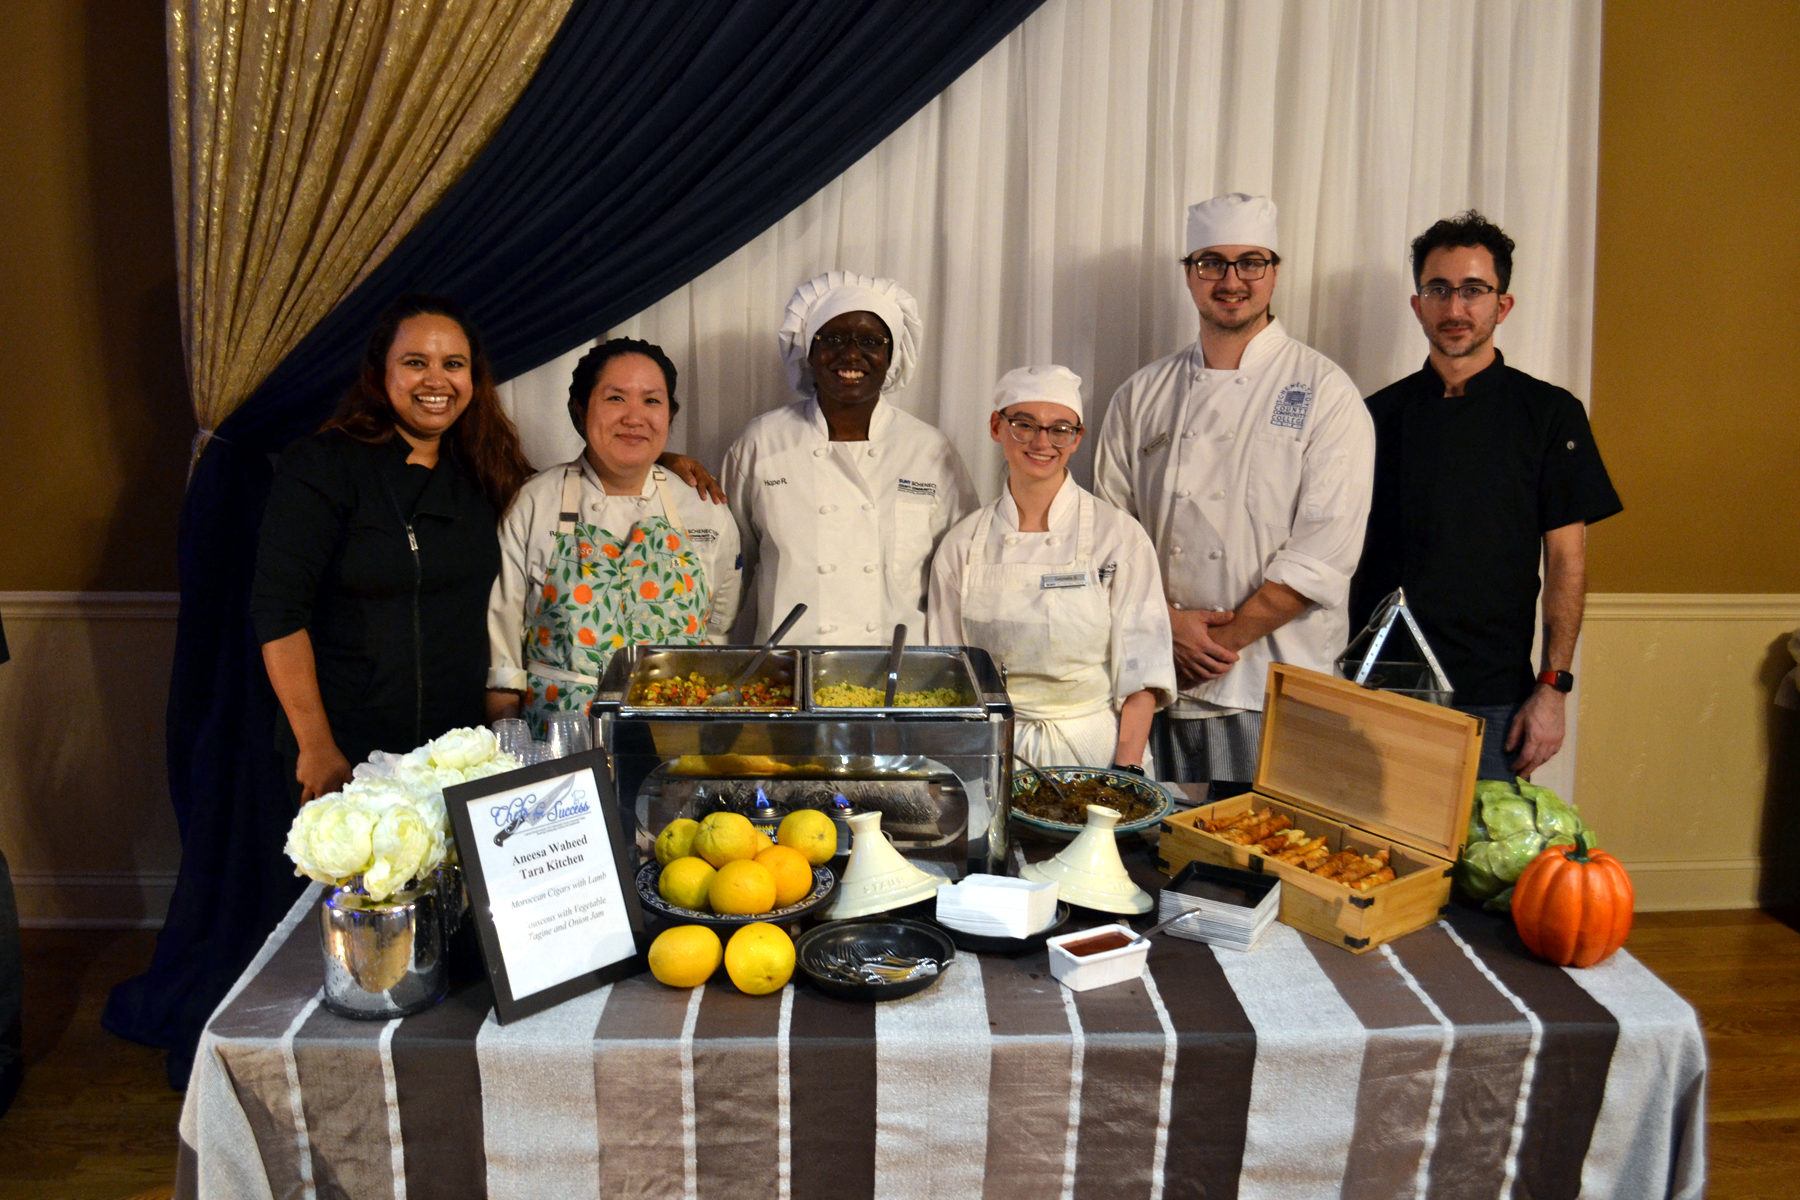 Guest Chef Aneesa Waheed with alumni and students in front of table with food